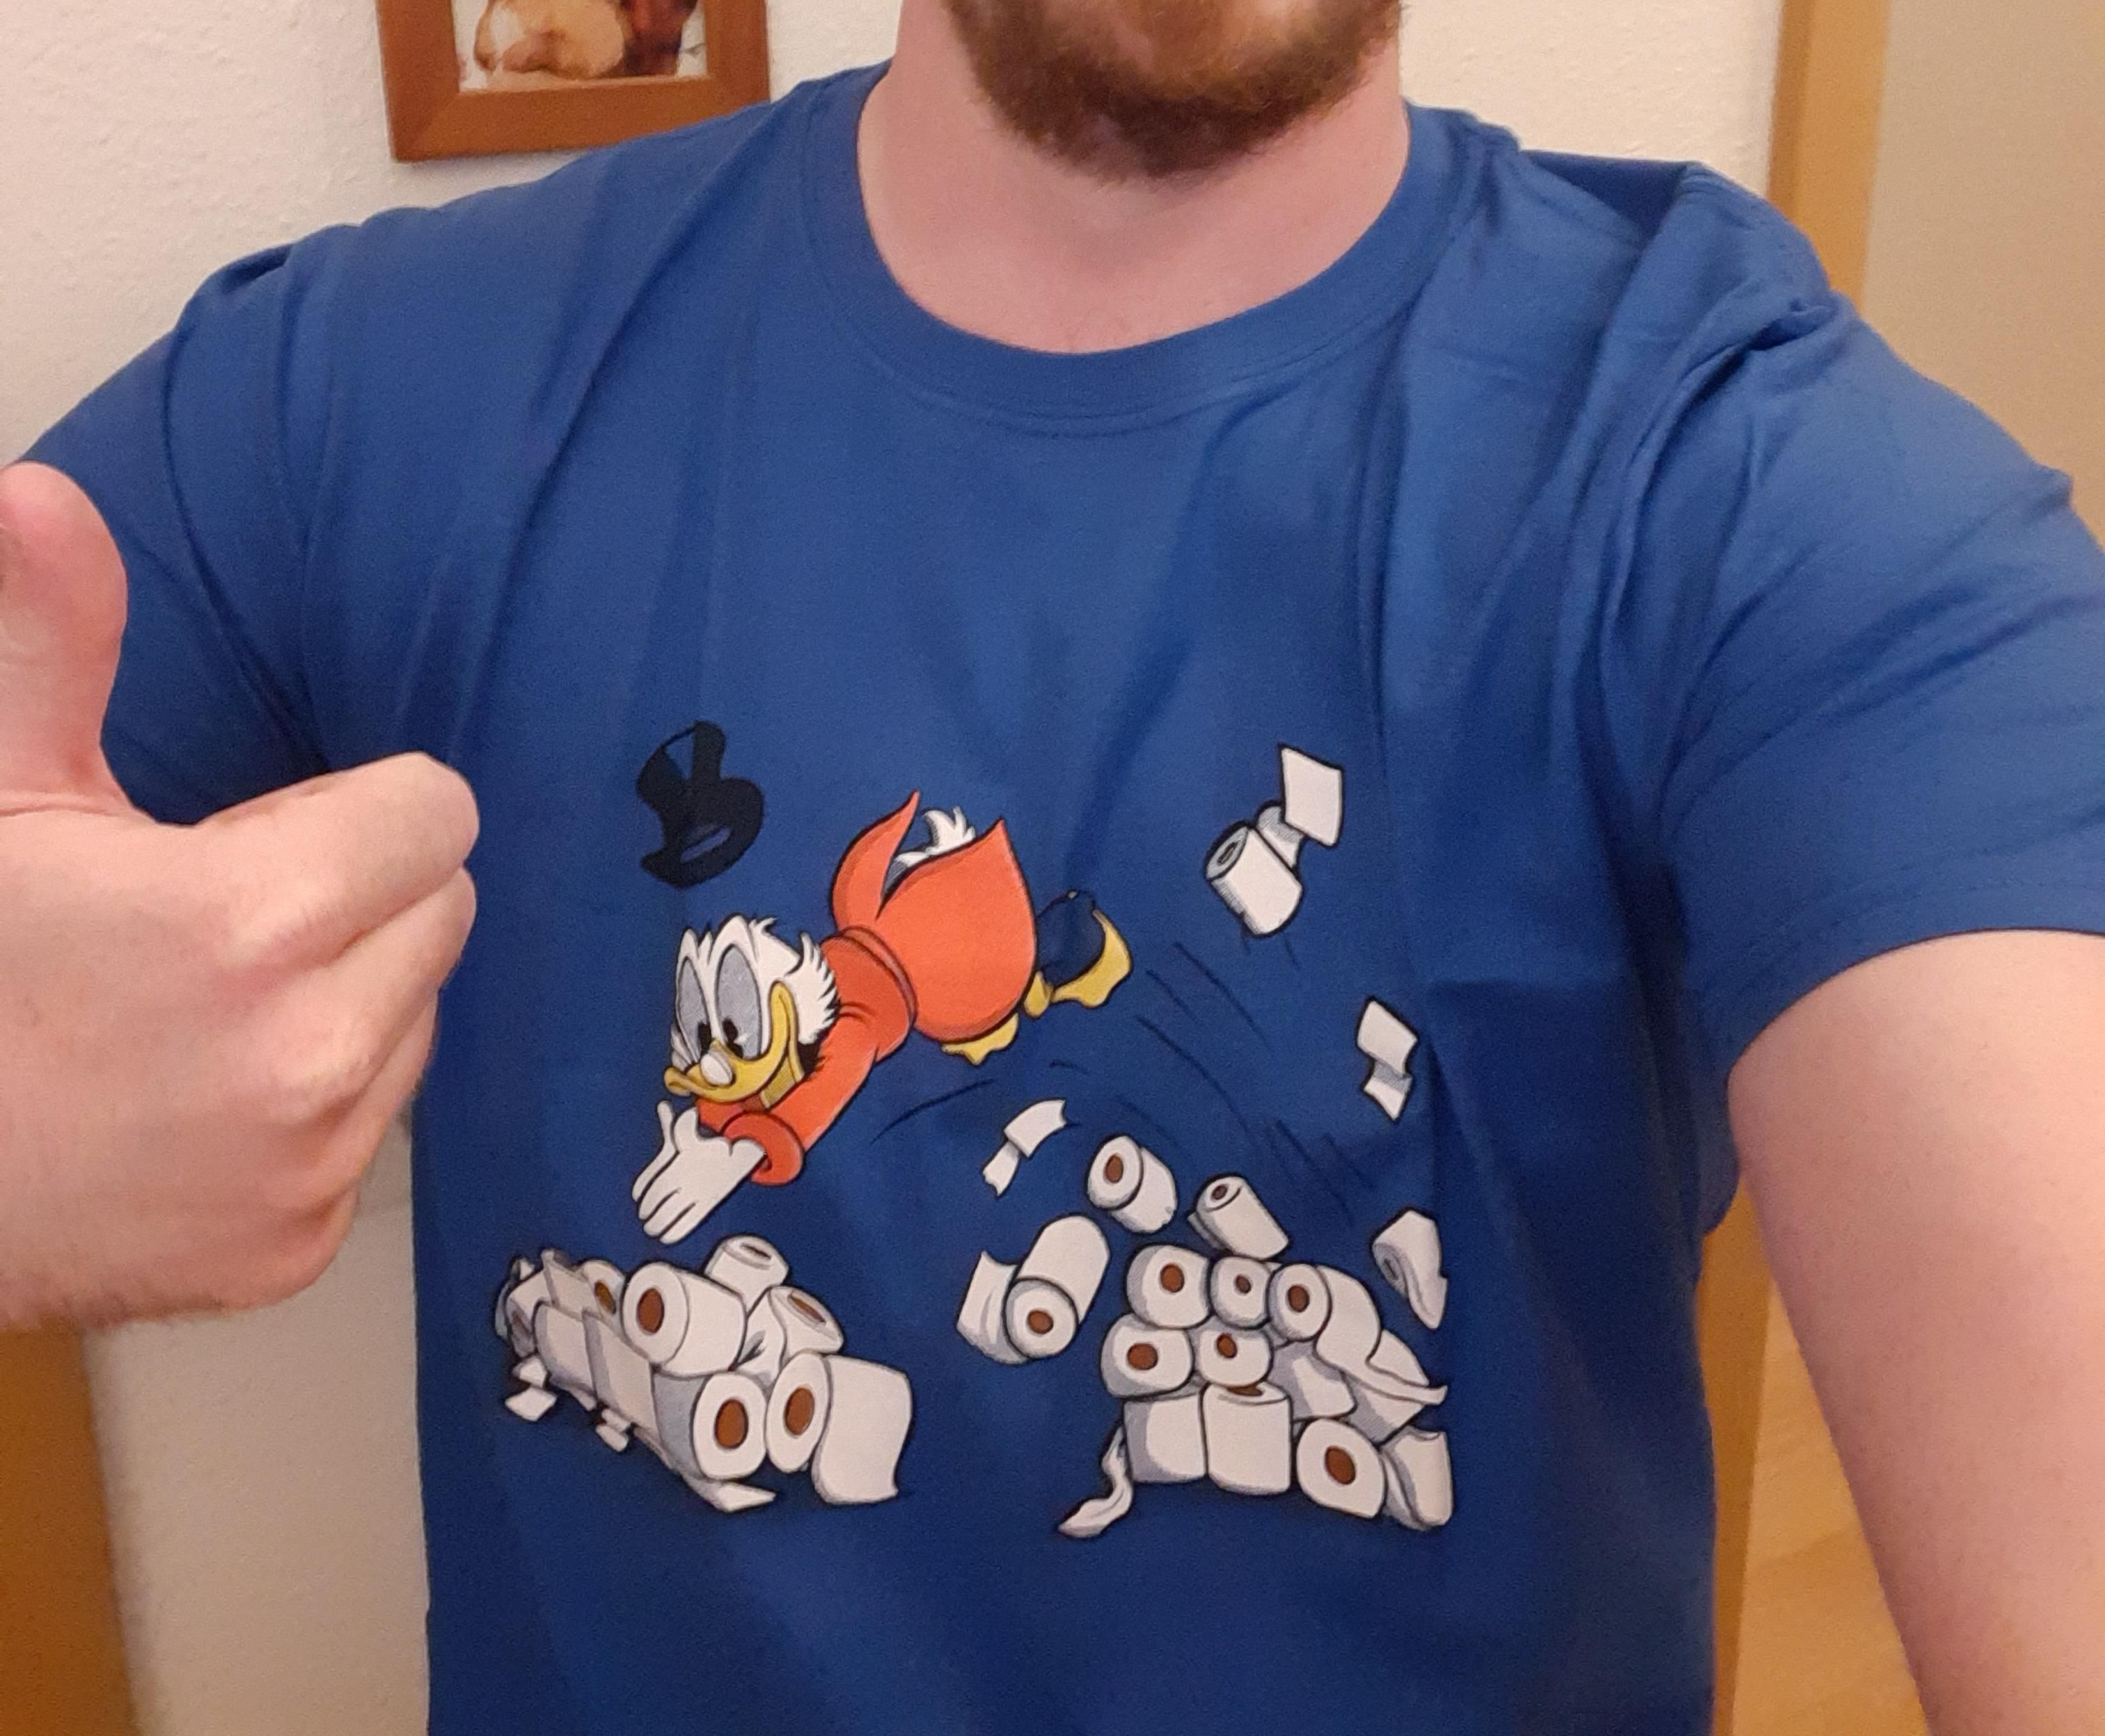 Say hello to my dope new shirt!